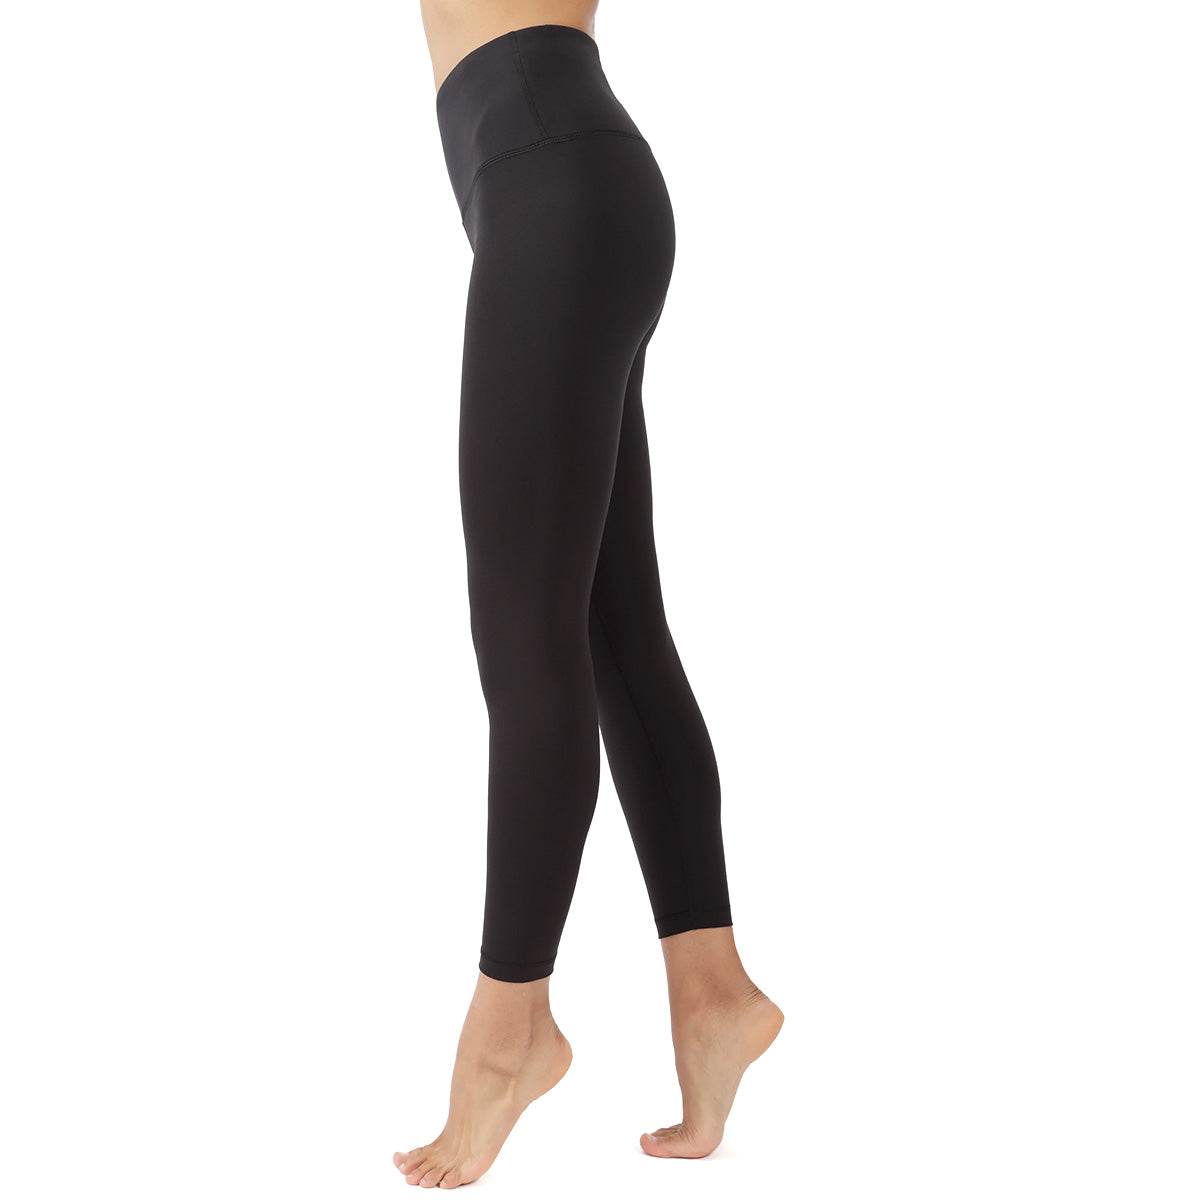 Yogalicious High Waist Squat Proof Lux Ankle Leggings for Women